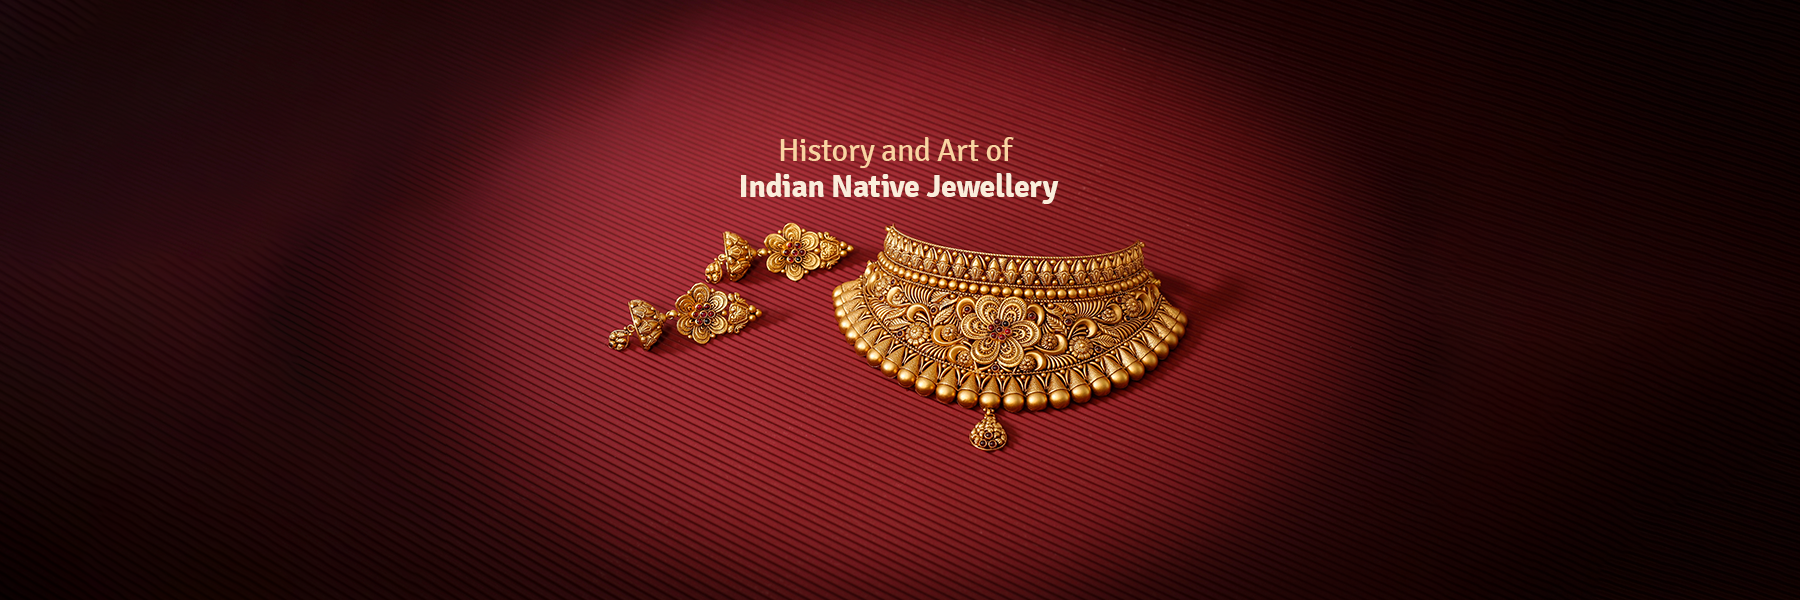 History and Art of Indian Native Jewellery FromIndia.com